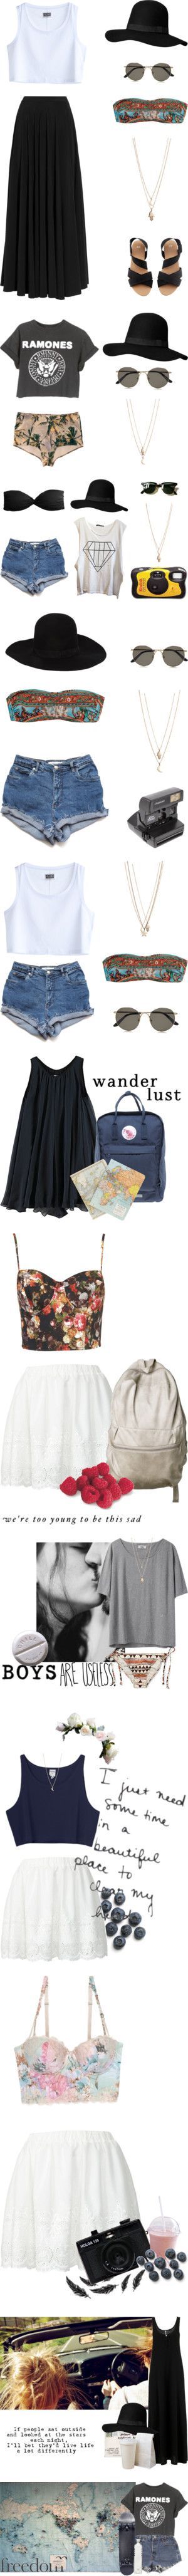 There is something so appealing about these outfits. Some girly and sweet, innoc